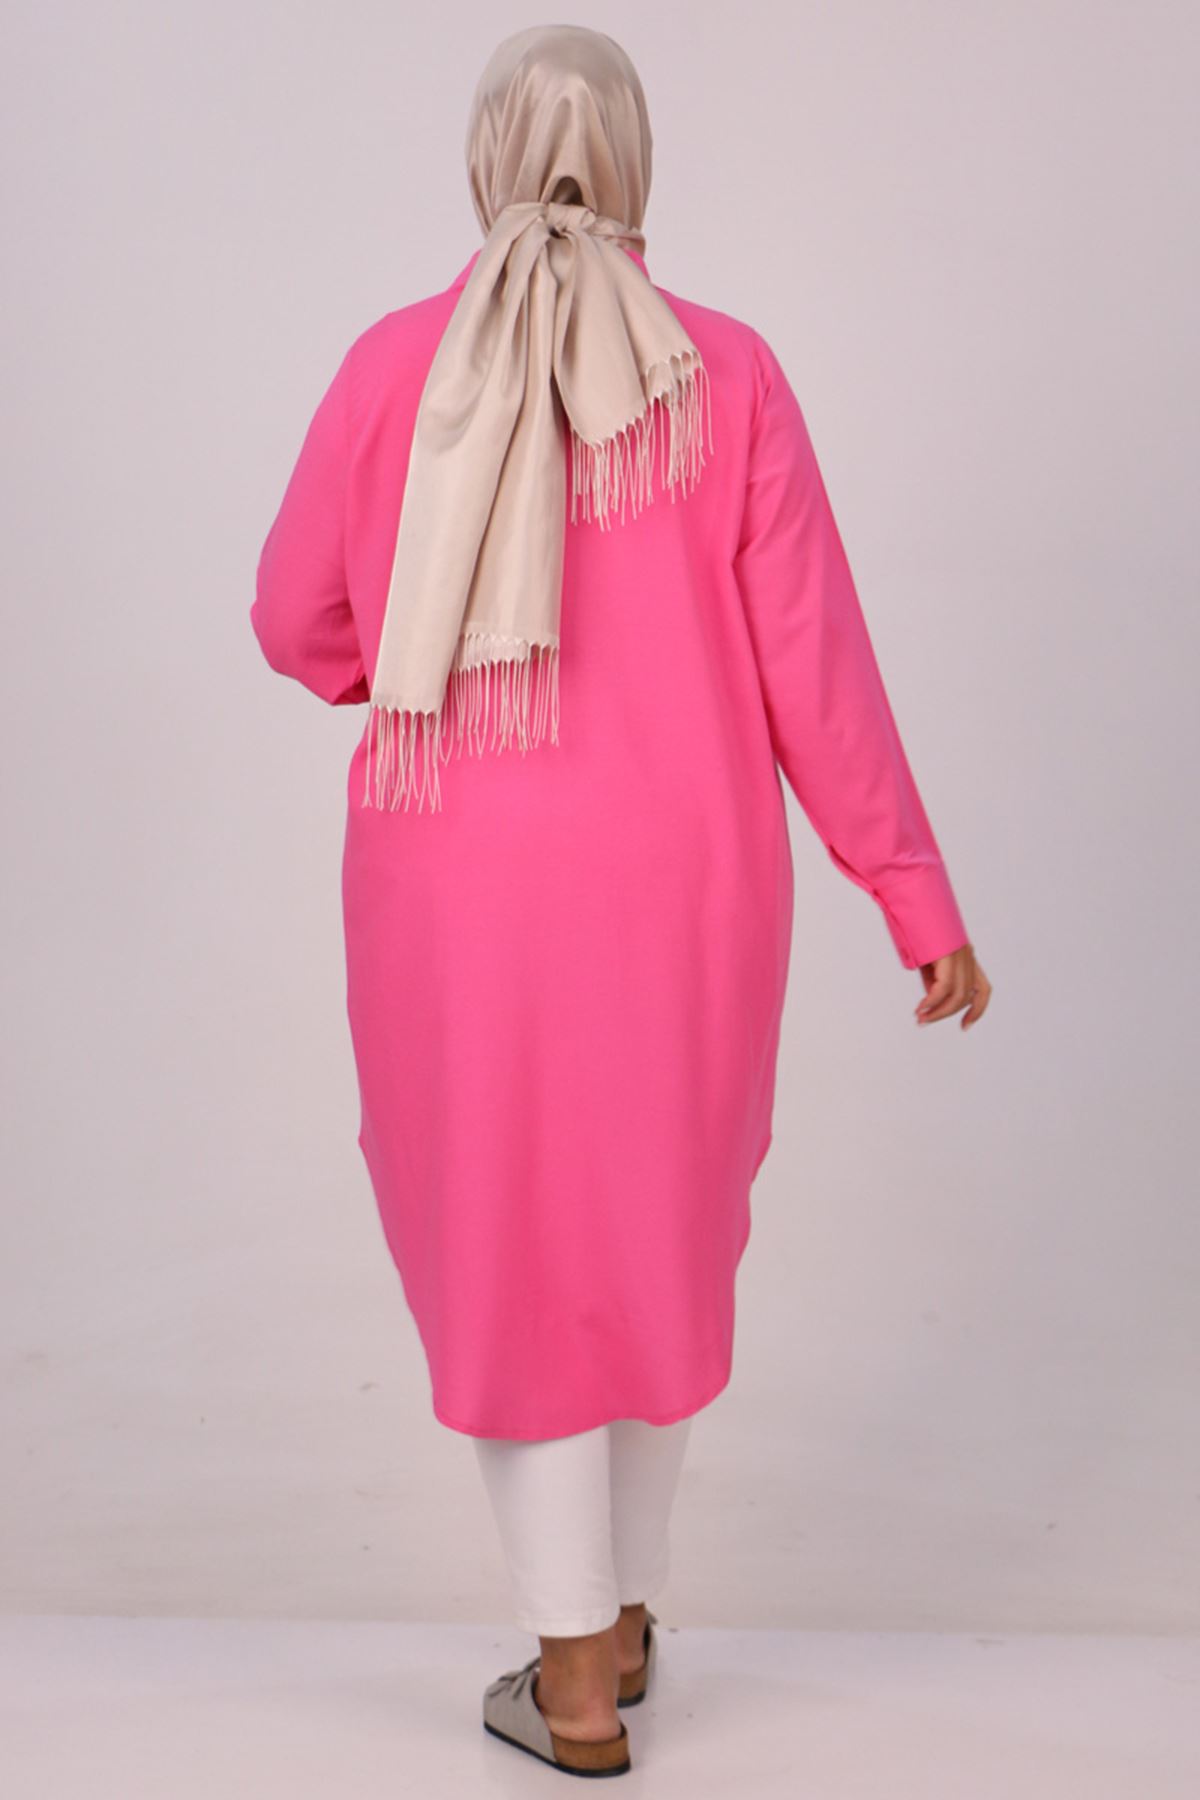 38085 Large Size Linen Shirt with Concealed Buttons - Pink